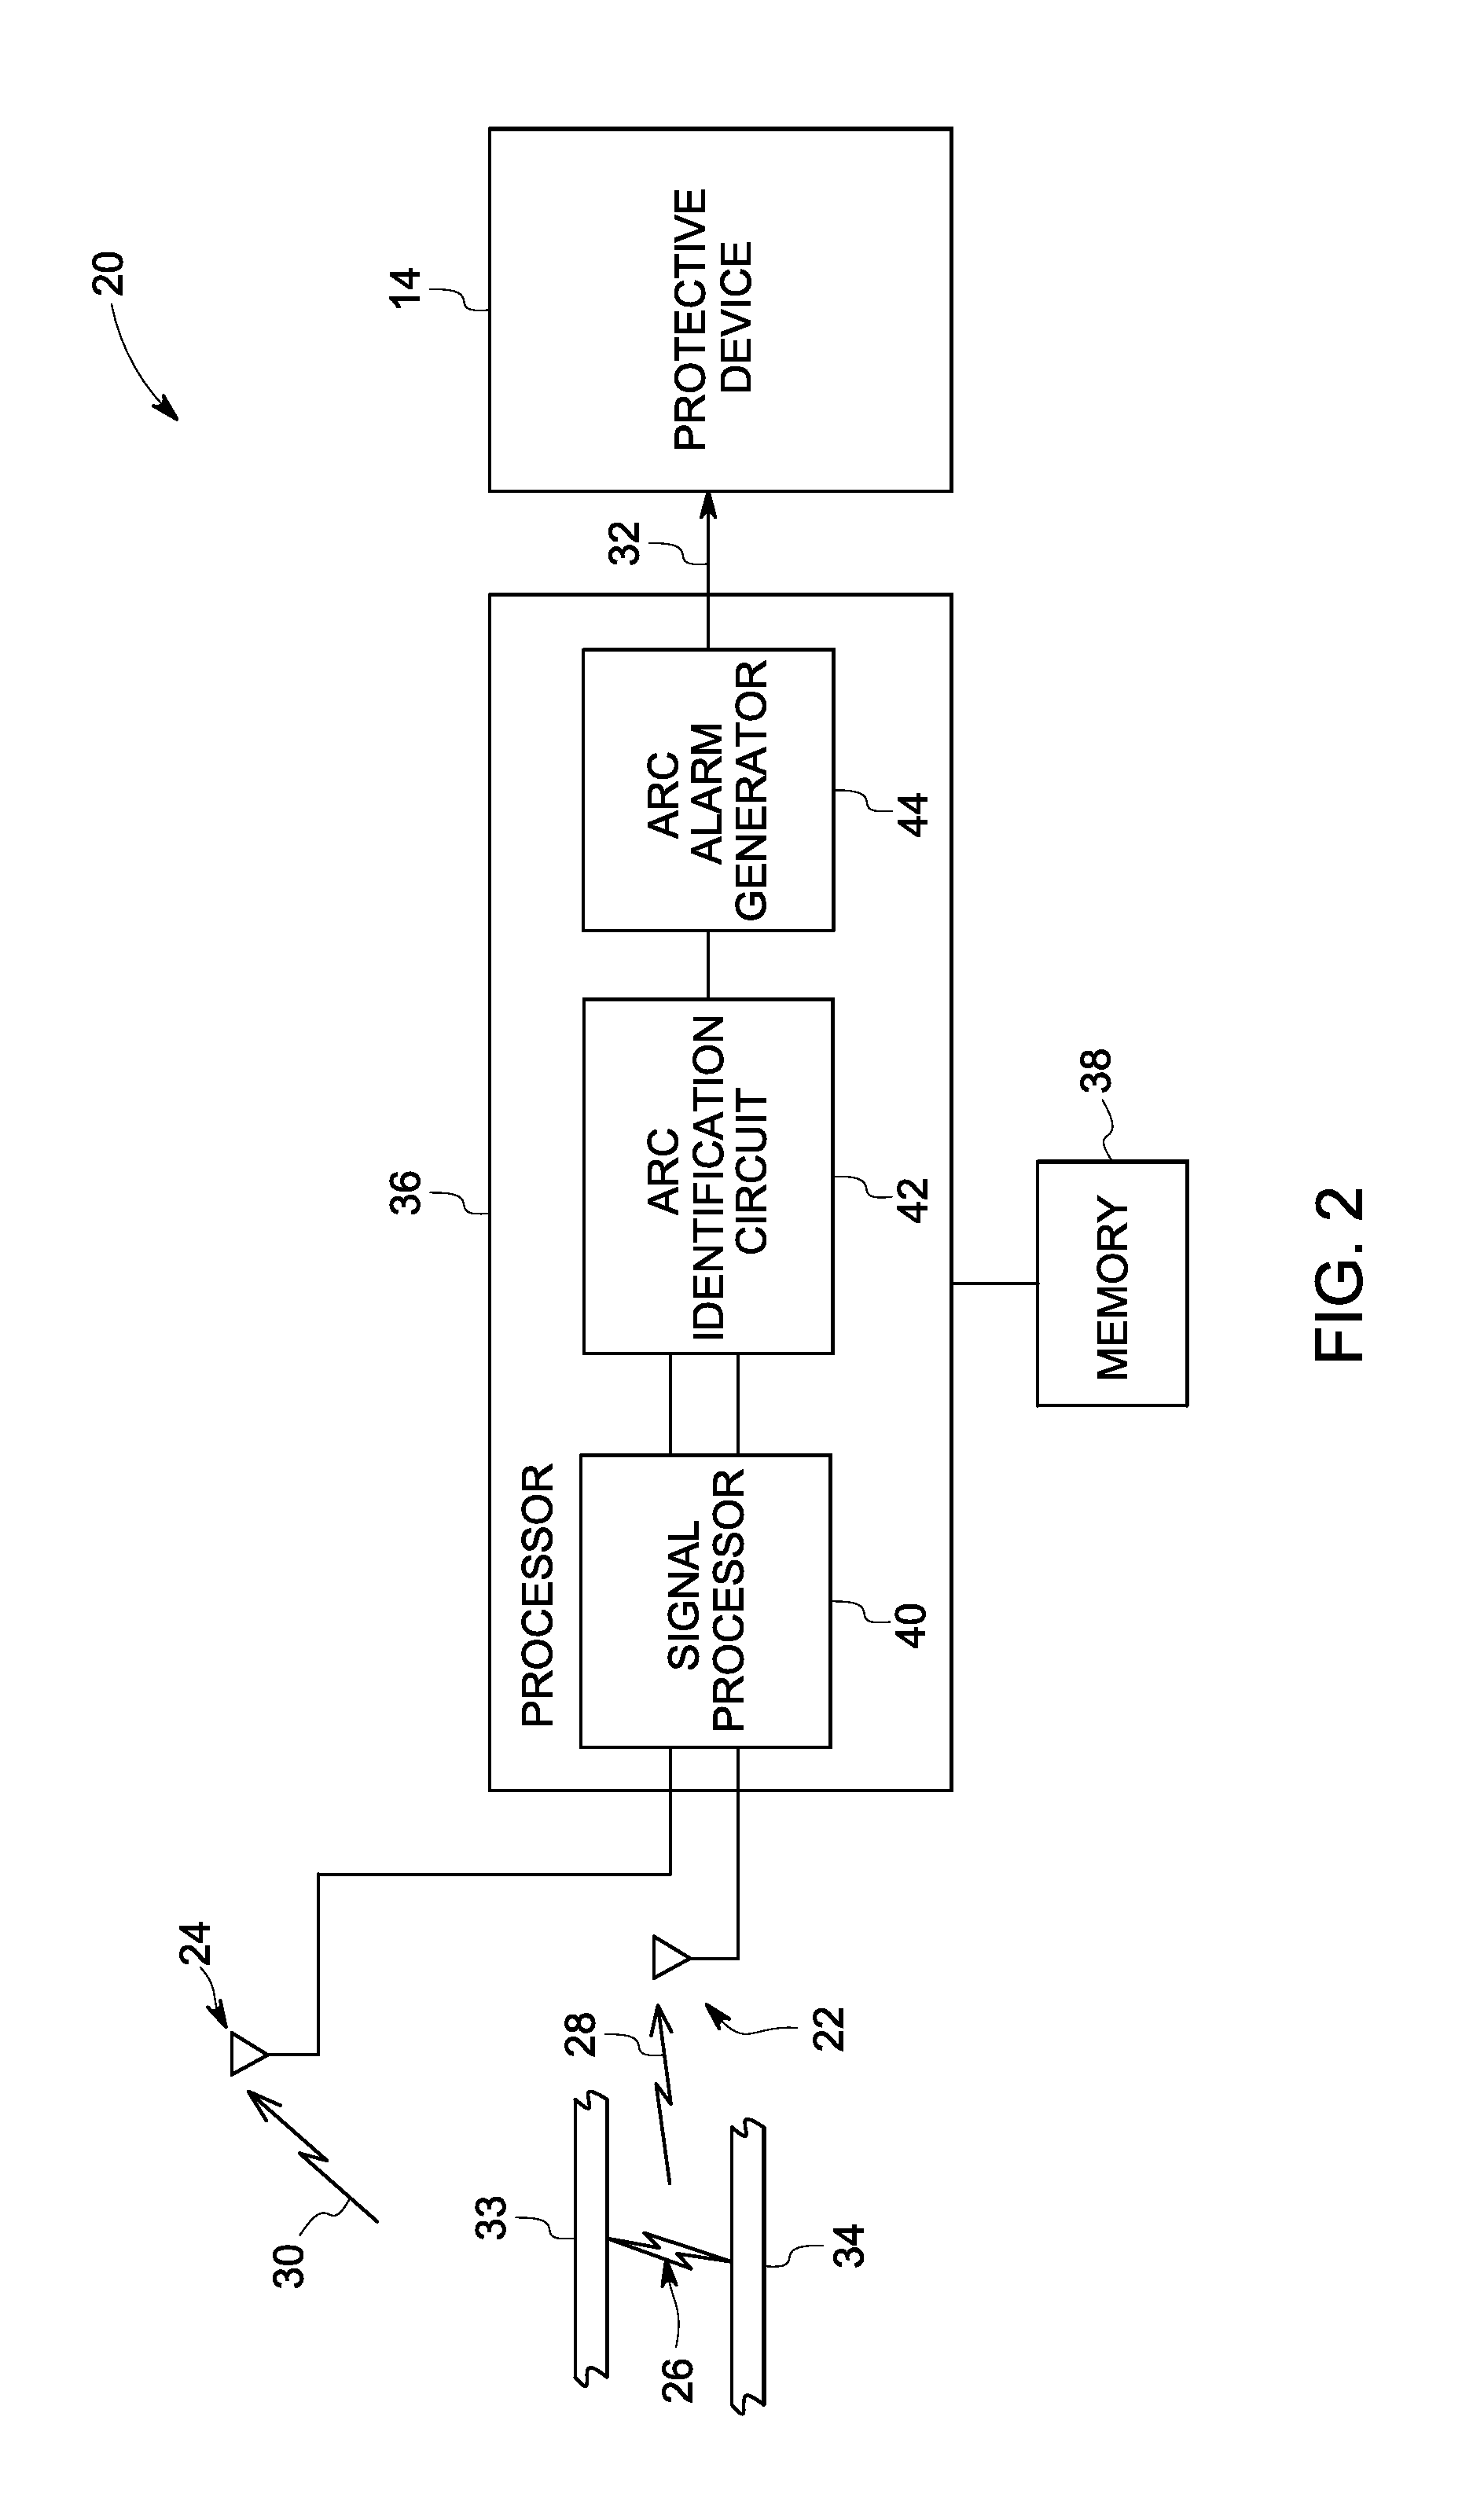 Arc detection system and method